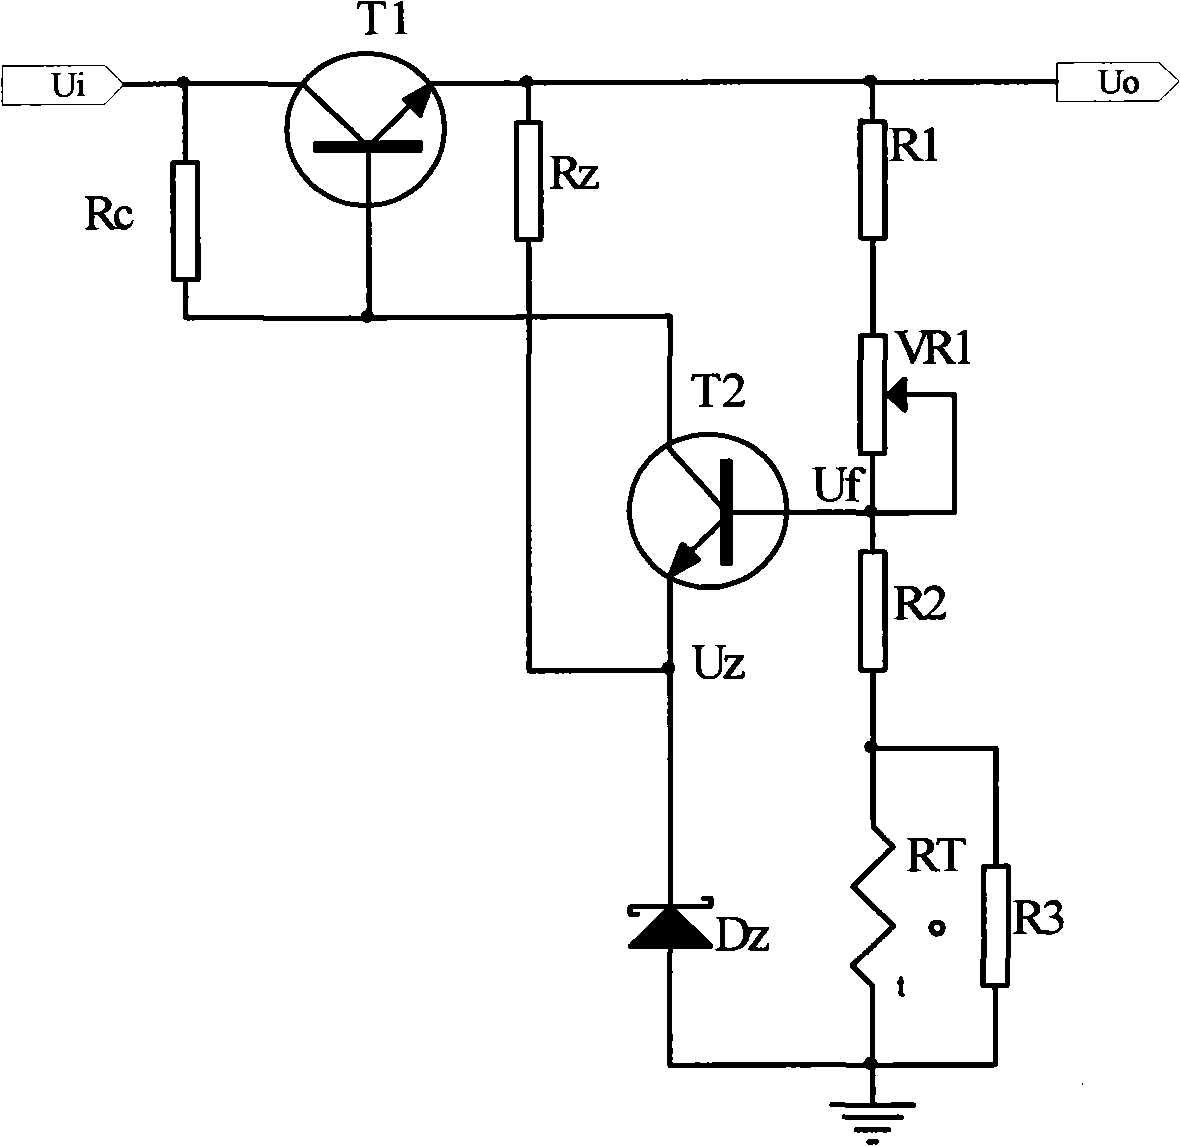 Circuit carrying out temperature compensation on bias voltage of avalanche photodiode